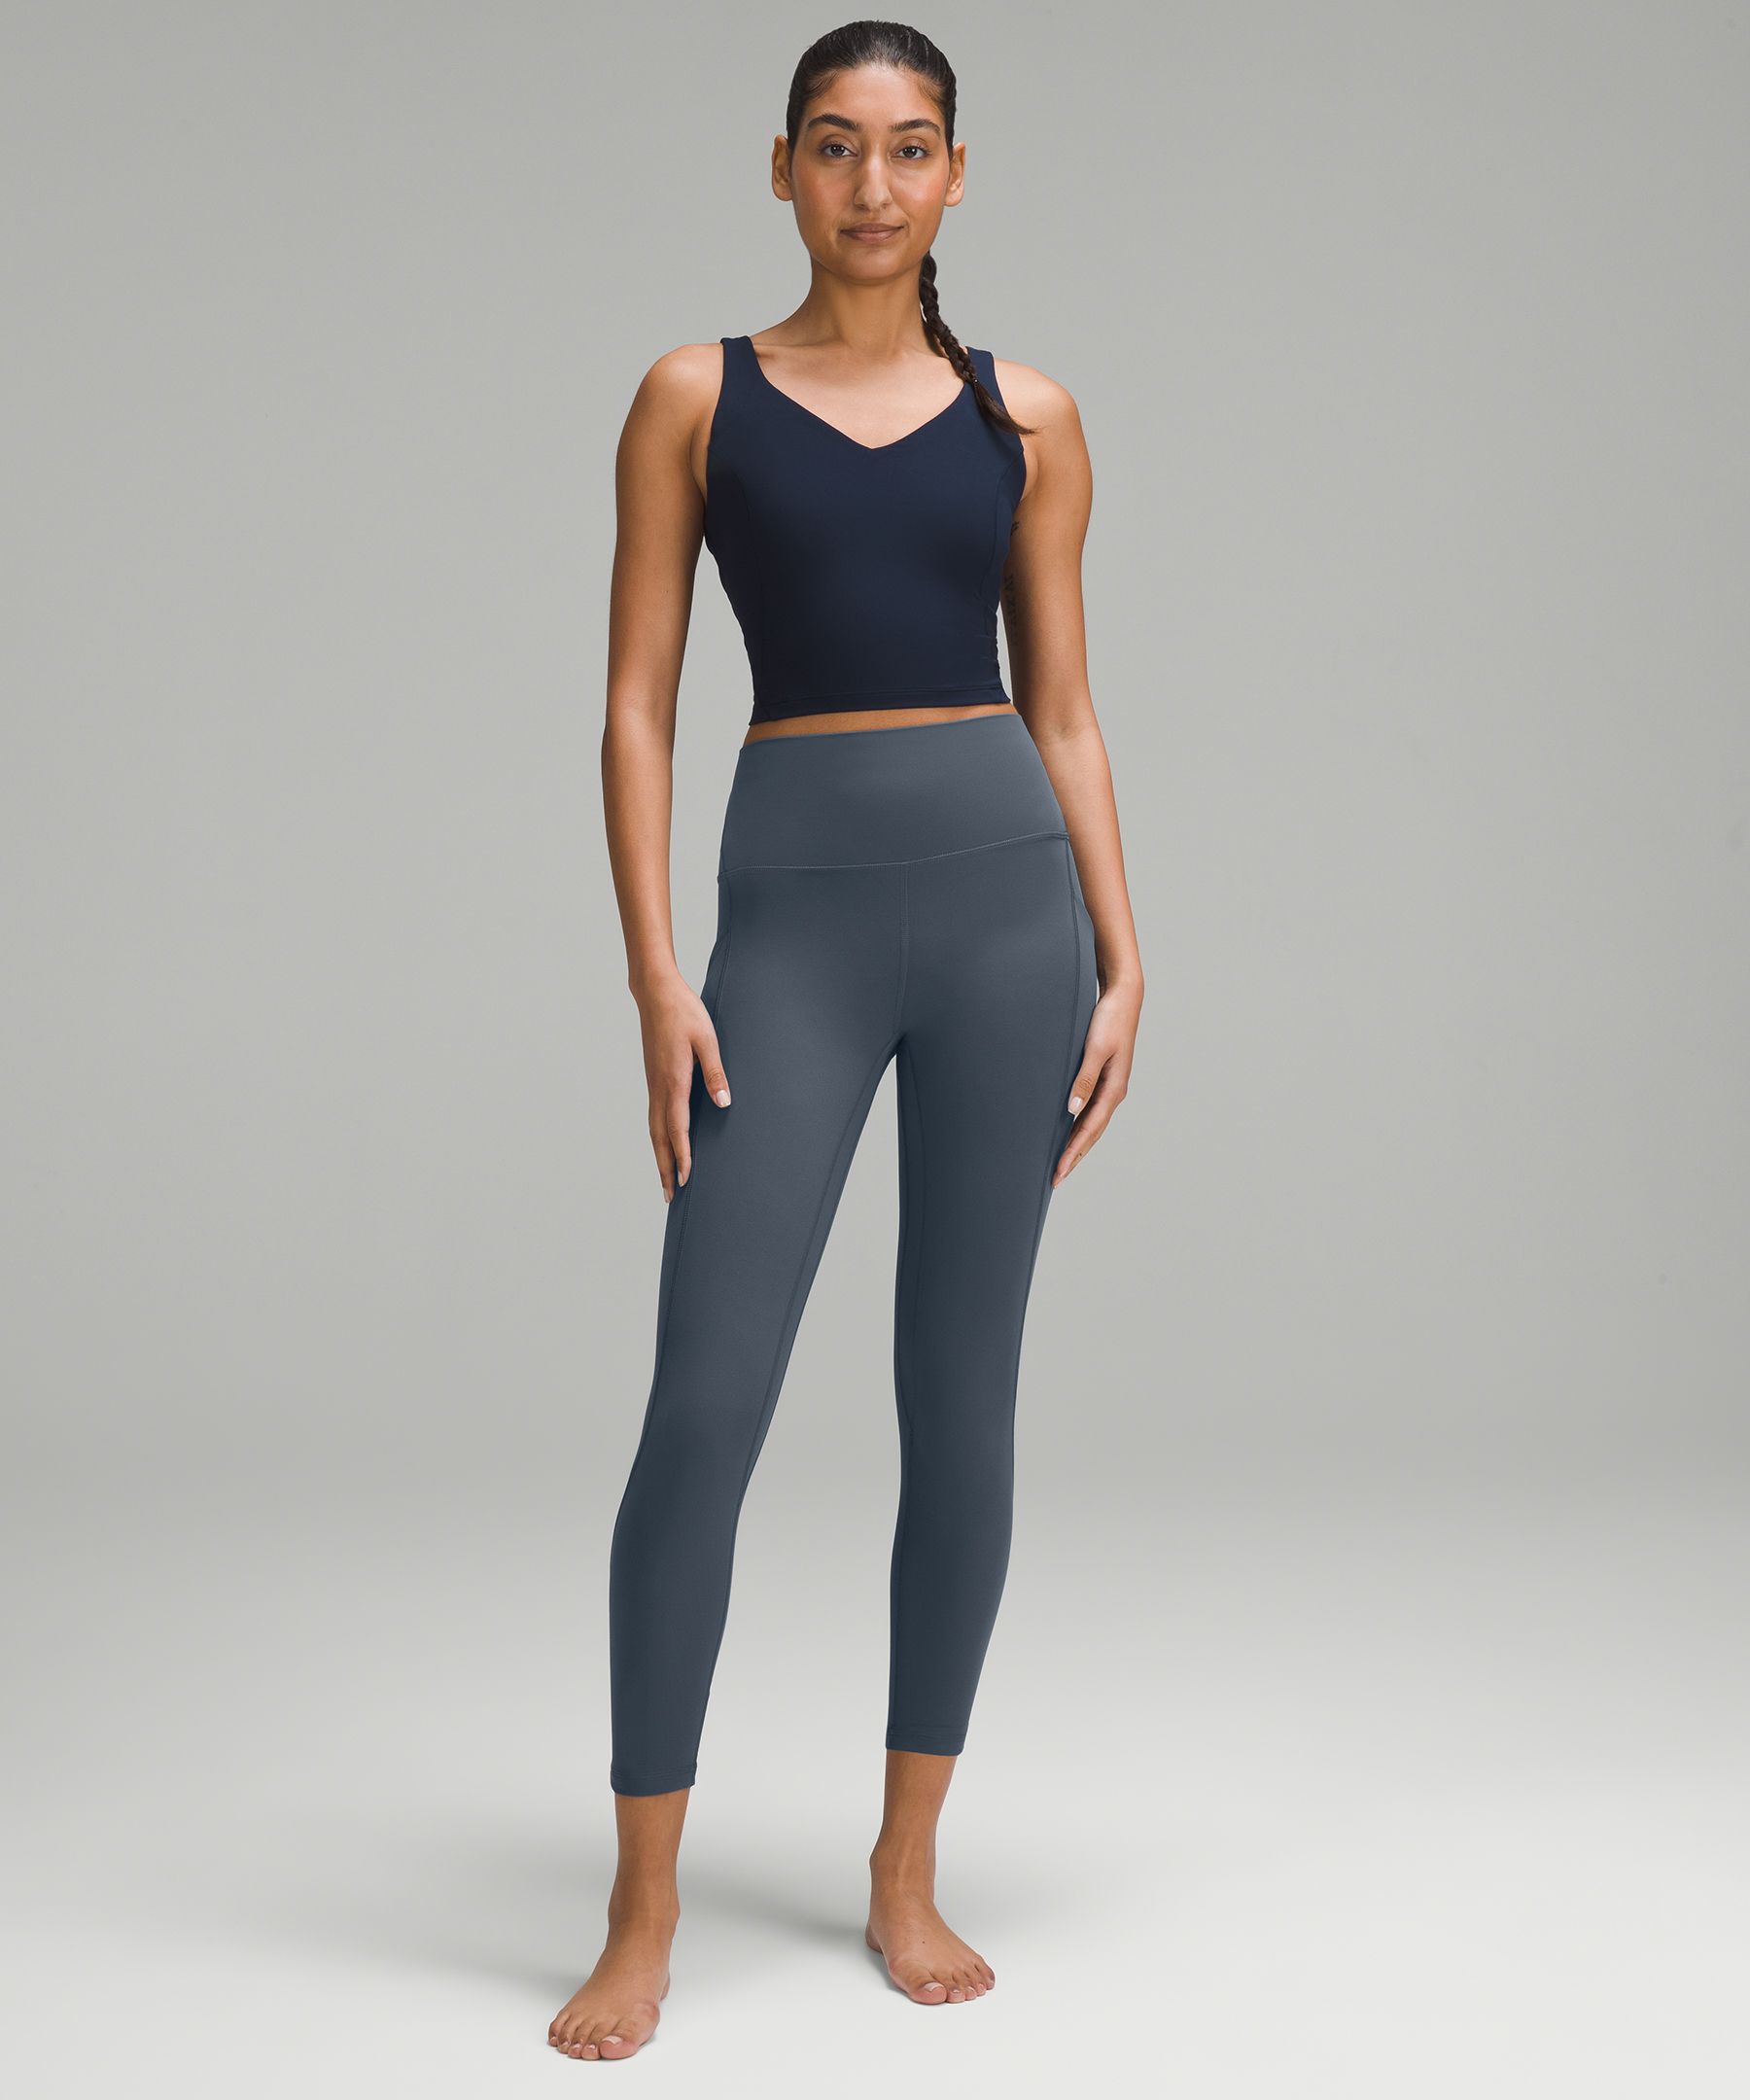 Khaki. Green. Olive. It's time for chic activewear. #lululemon #partner –  The FiFi Report